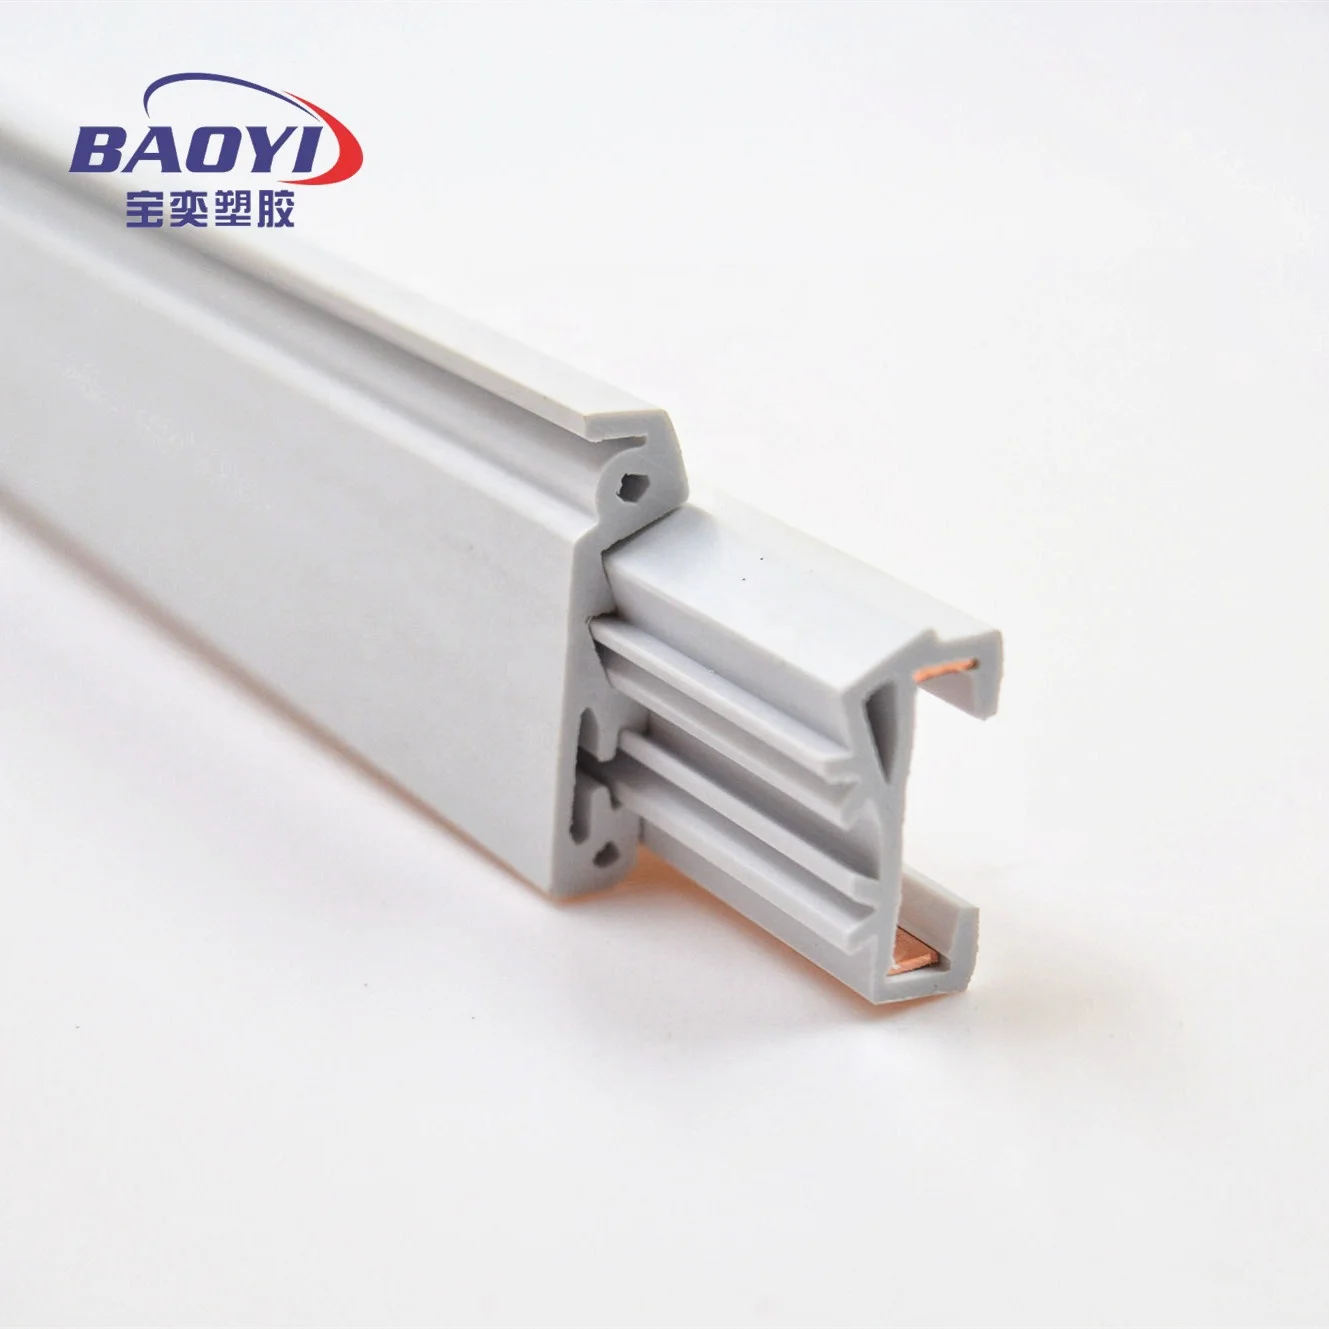 Factory OEM  co-extrusion PVC profile with cooper conductor for LED lighting track rail